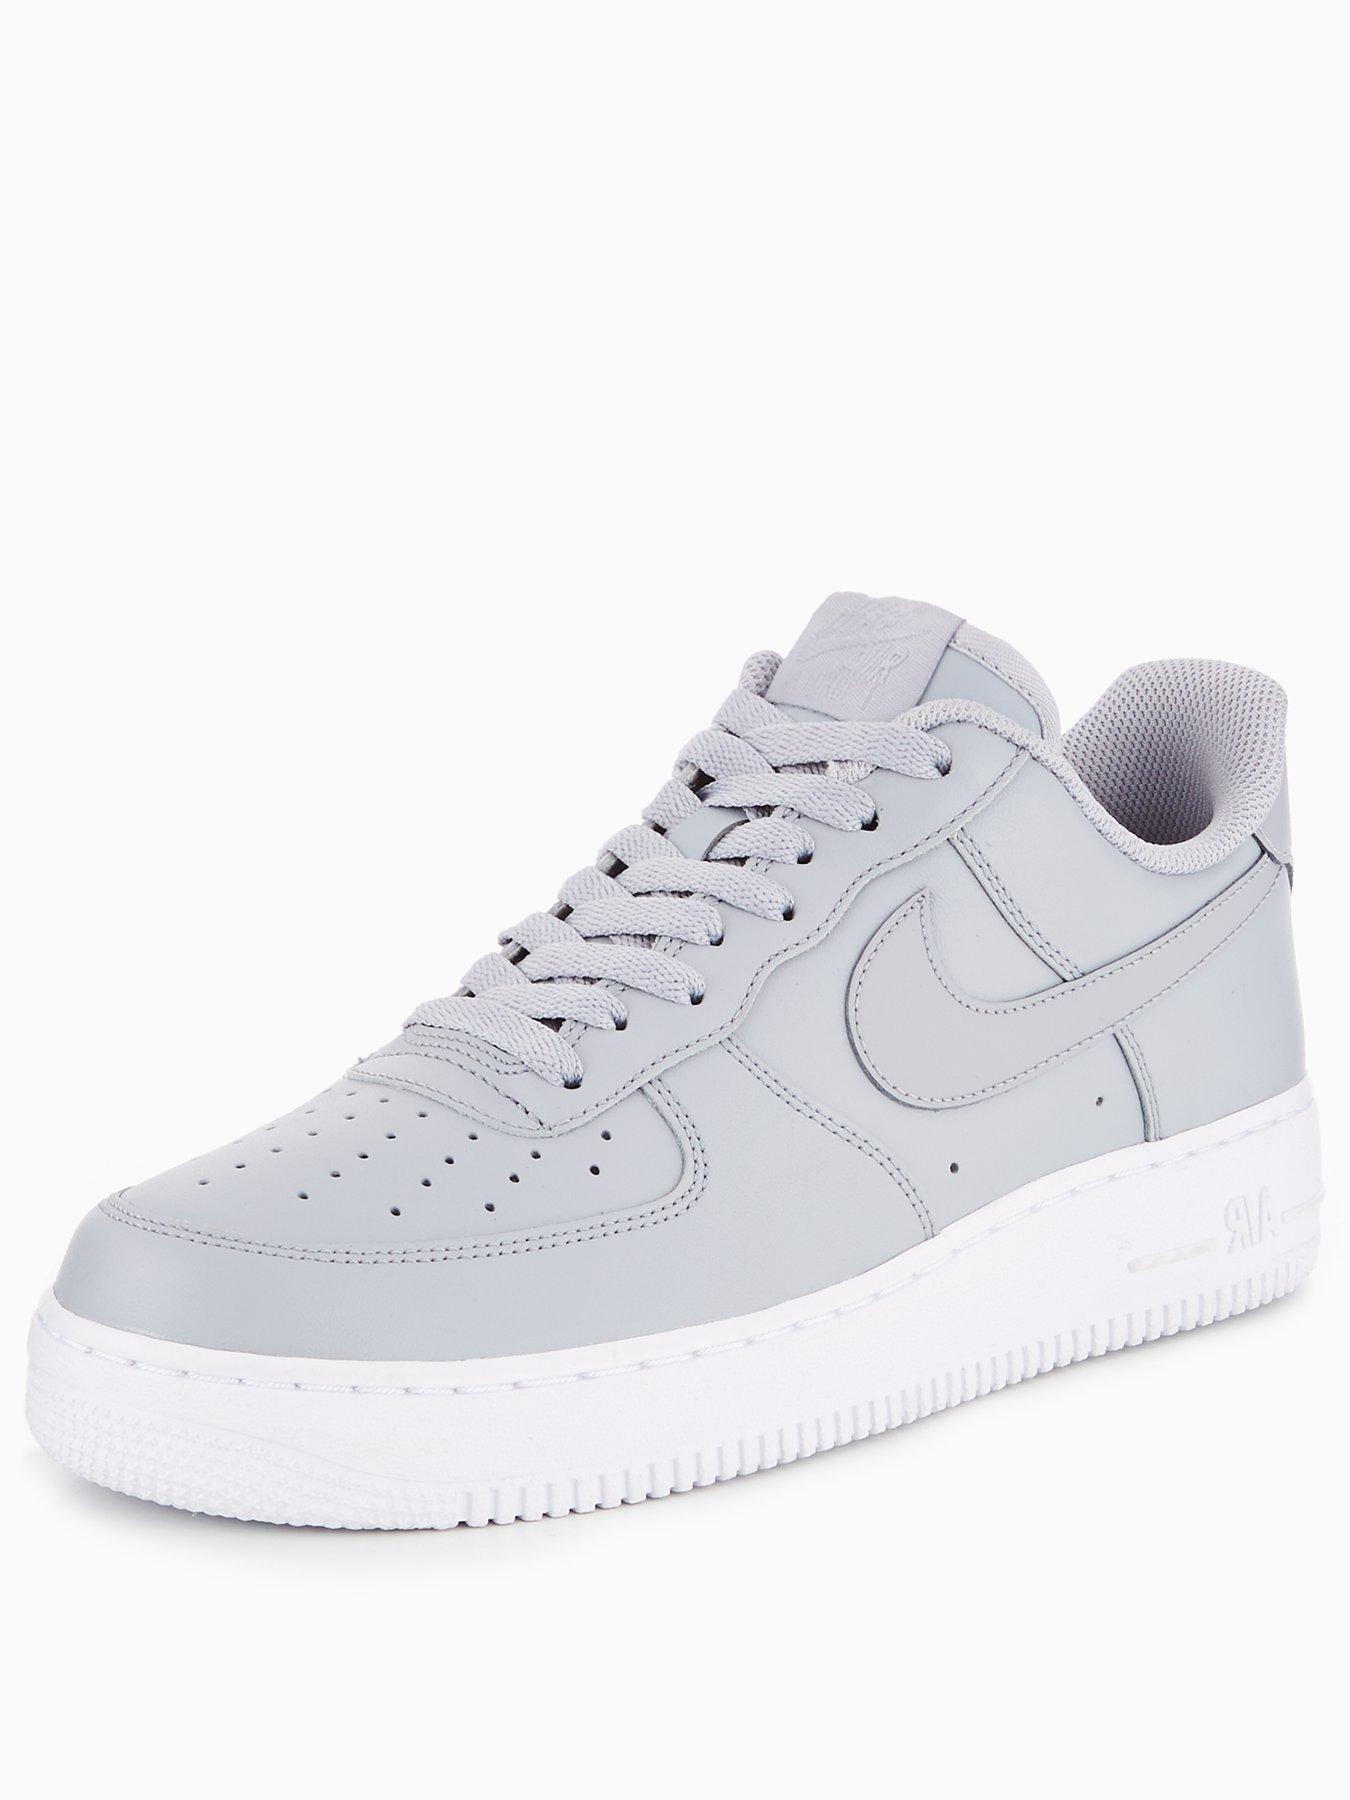 Nike Air Force 1 '07 - Grey/White | littlewoods.com